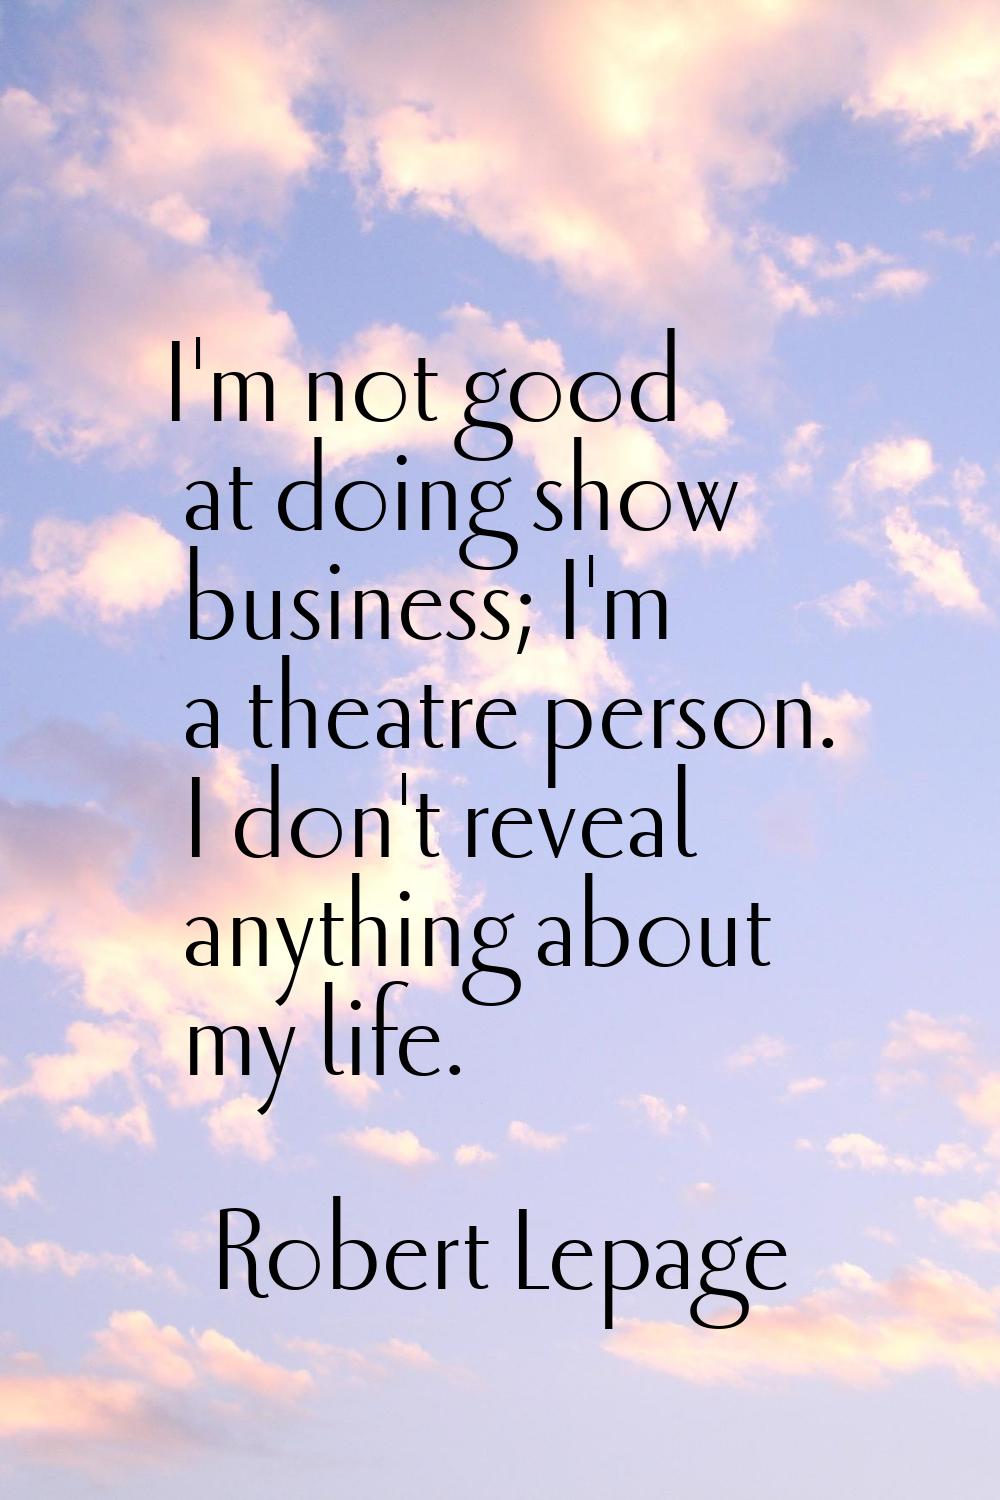 I'm not good at doing show business; I'm a theatre person. I don't reveal anything about my life.